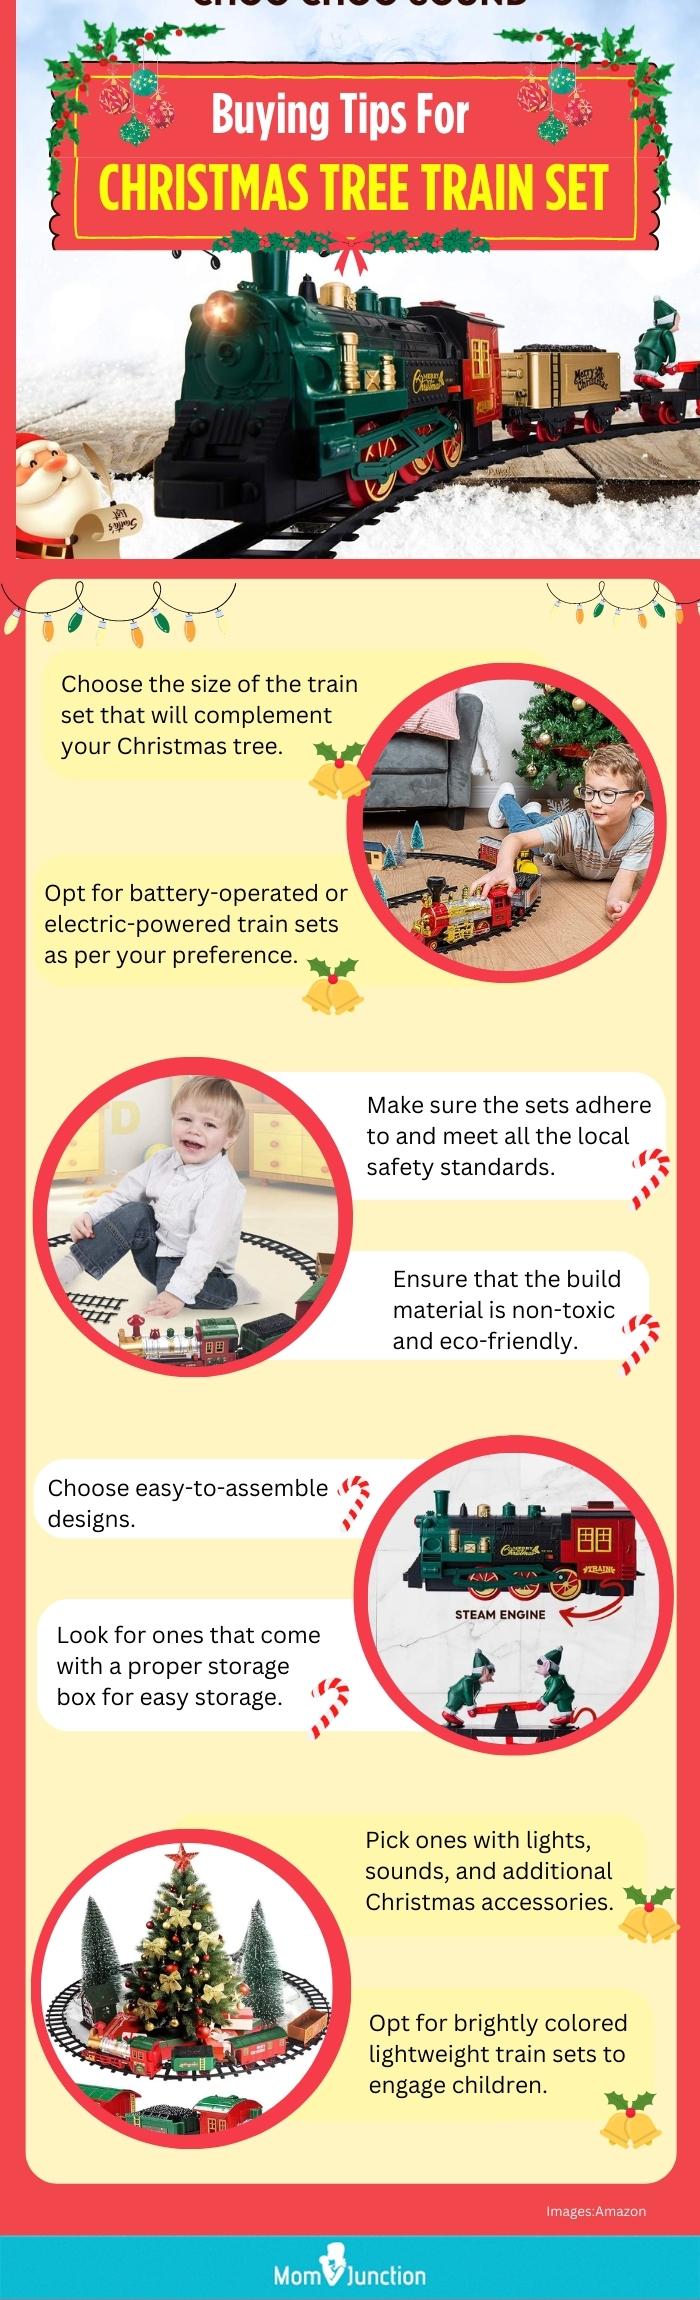 Buying Tips For Christmas Tree Train Set (infographic)